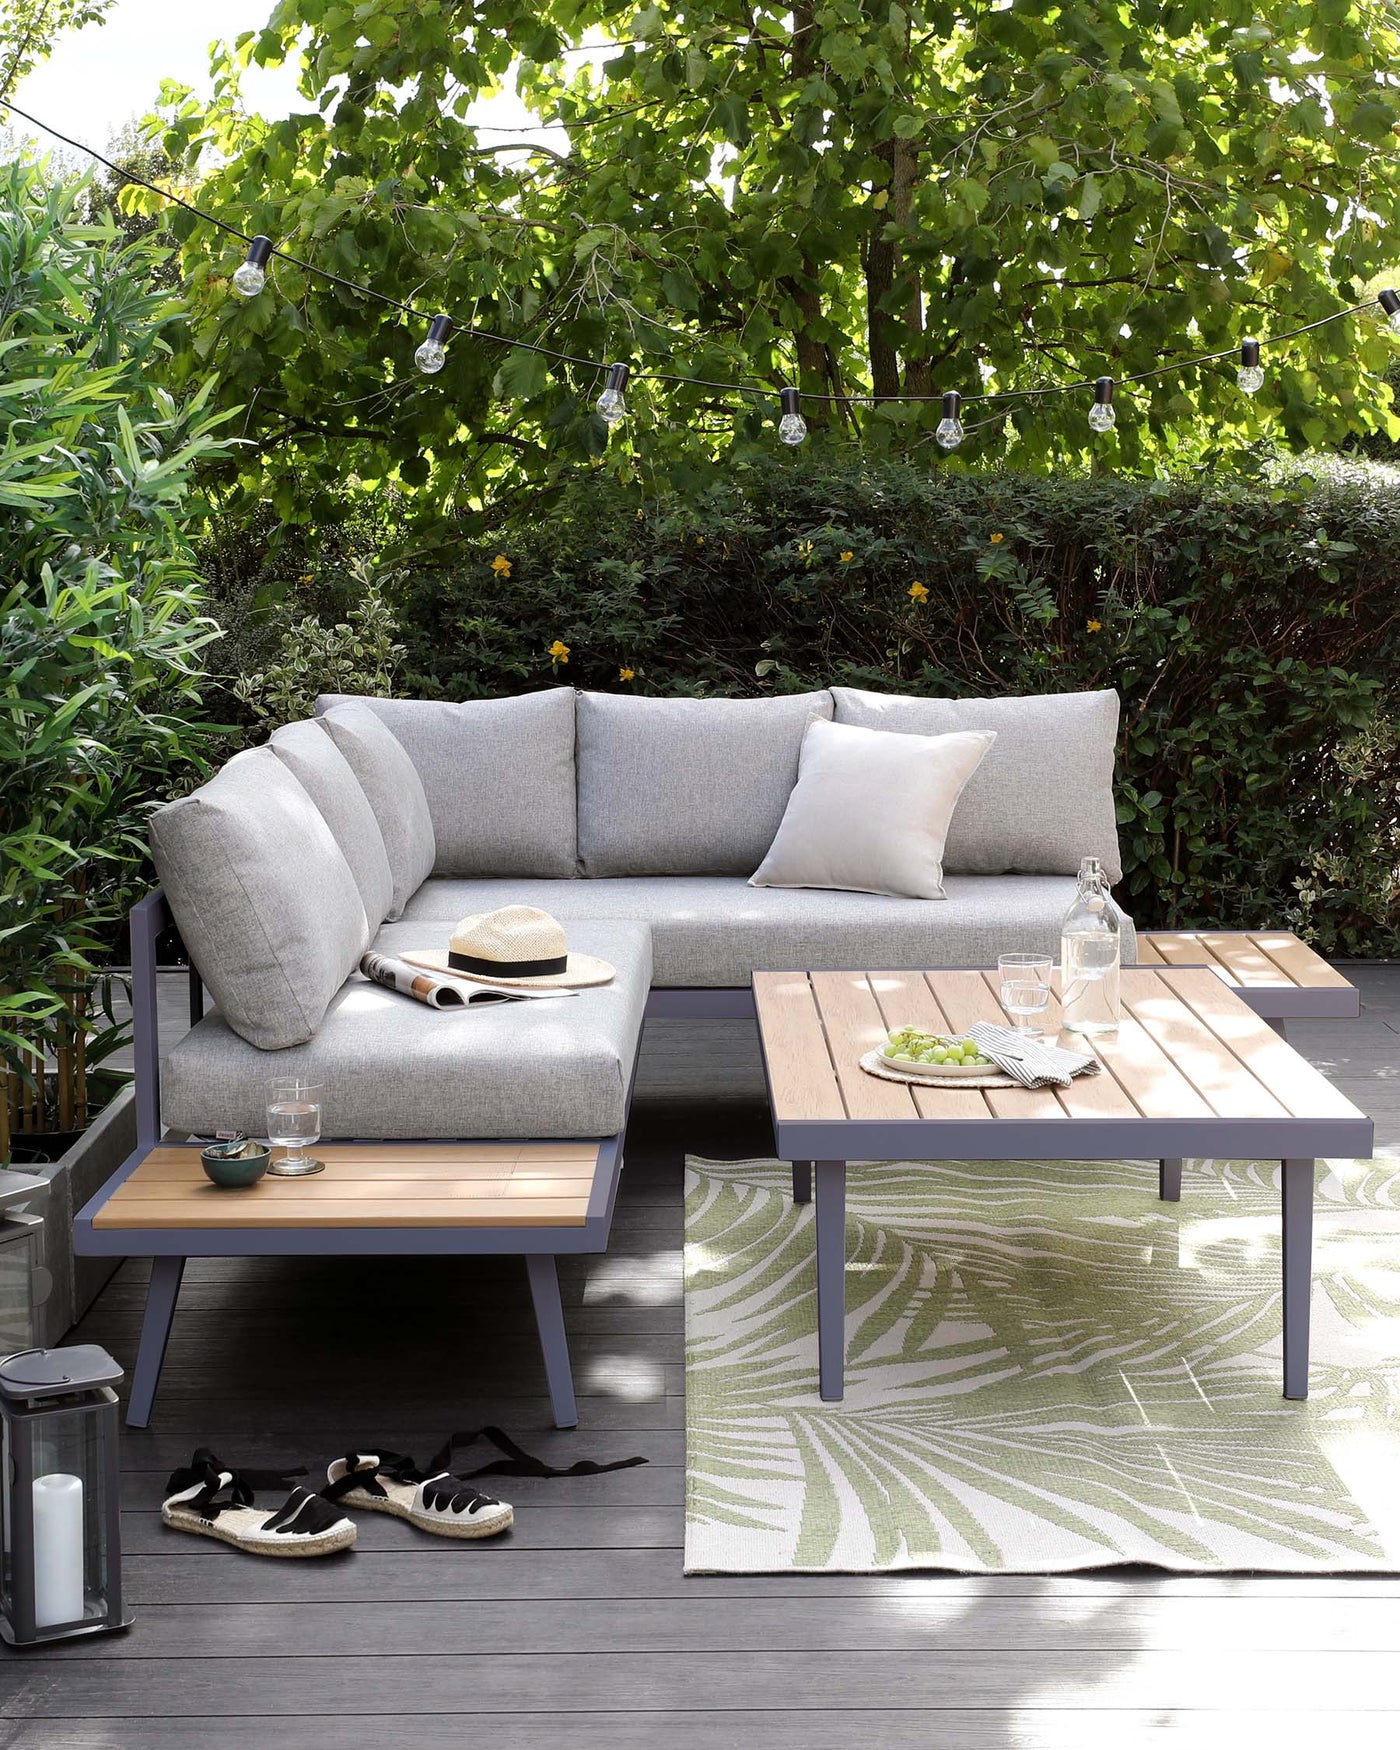 Modern outdoor furniture set featuring a grey upholstered corner sofa with additional cushions and a rectangular coffee table with a natural wood finish top and grey legs. Accessories such as a hat and sneakers give a lived-in look, all displayed on an outdoor rug with a leaf pattern, set against a backdrop of lush greenery and strung patio lights.